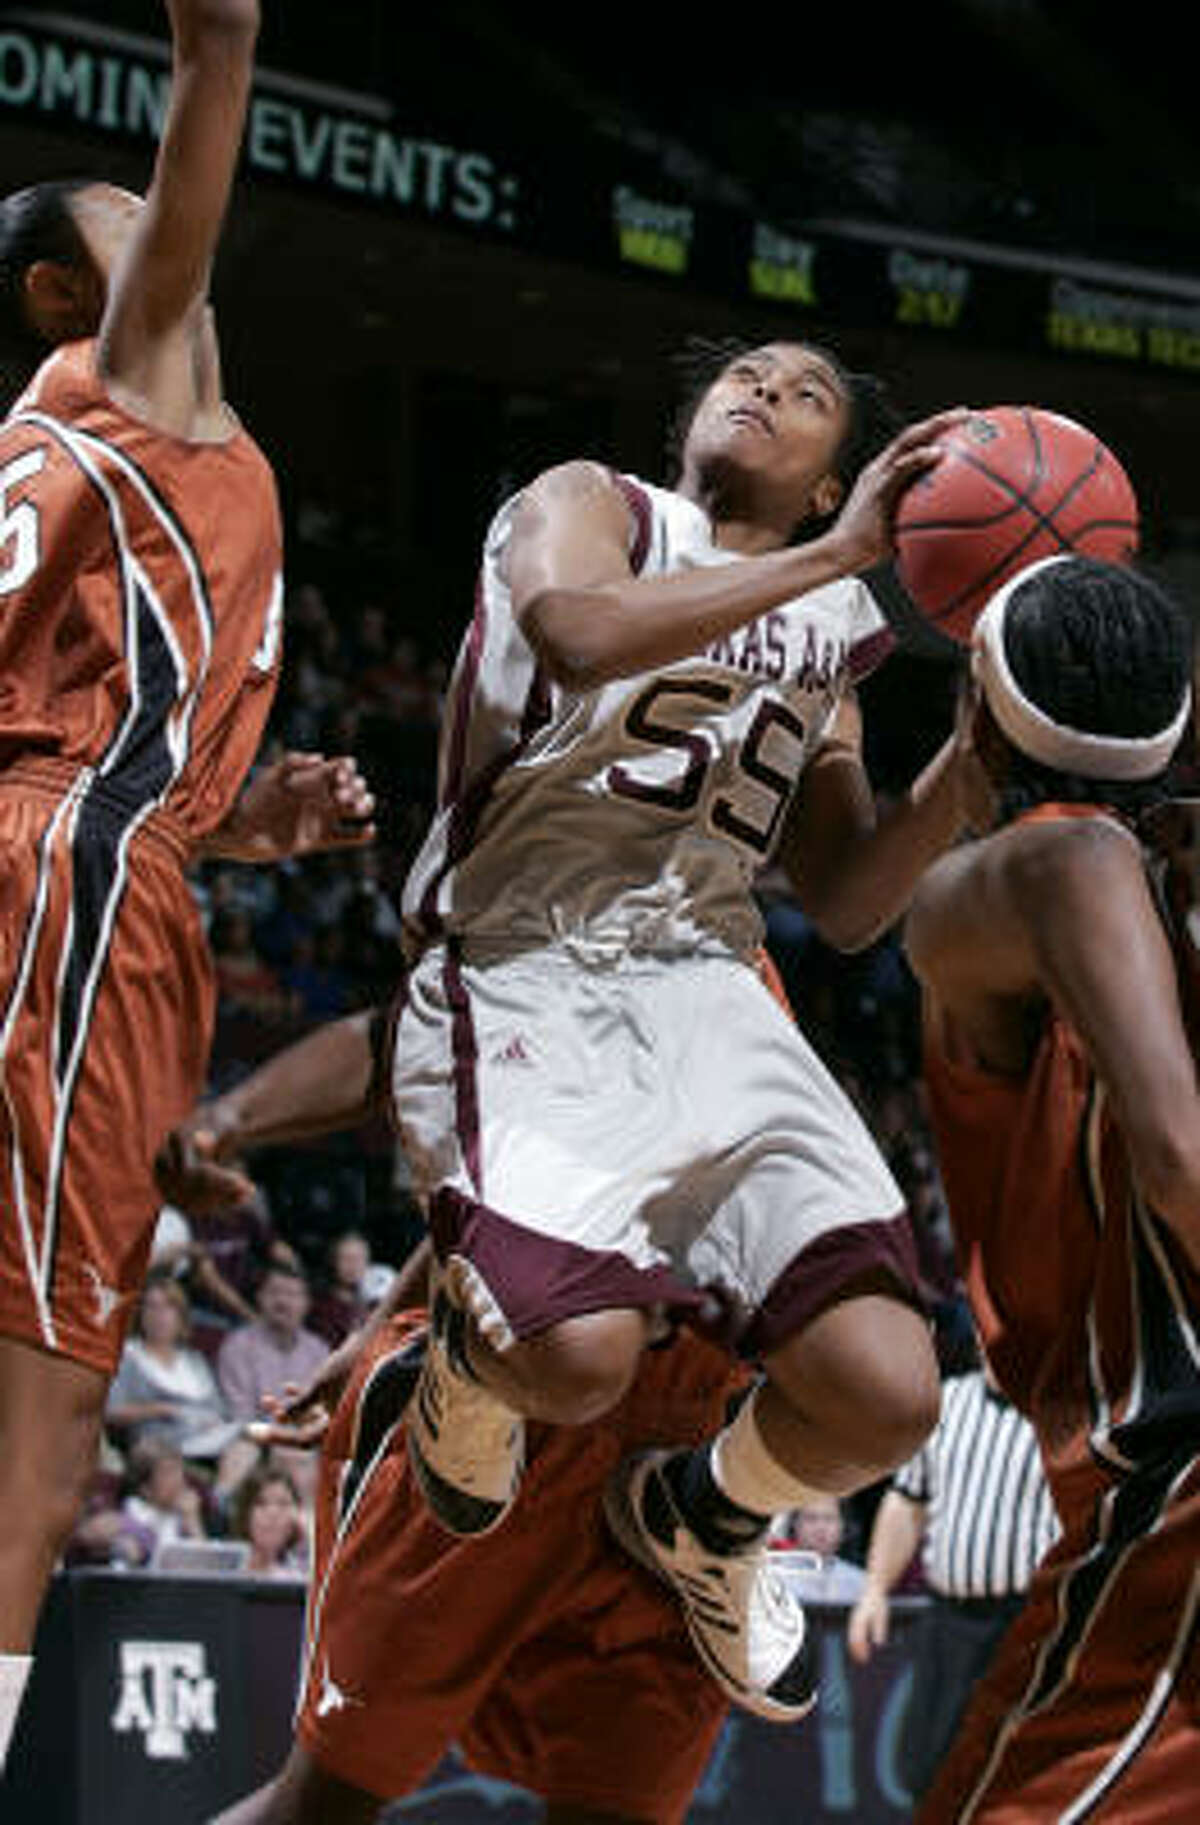 Texas A&M guard Danielle Gant cuts through the Texas defenders Ashley Lindsey, left, and Earnesia Williams during the first half to score two of her 25 points on Feb. 9 at Reed Arena in College Station. A&M defeated Texas 66-57.